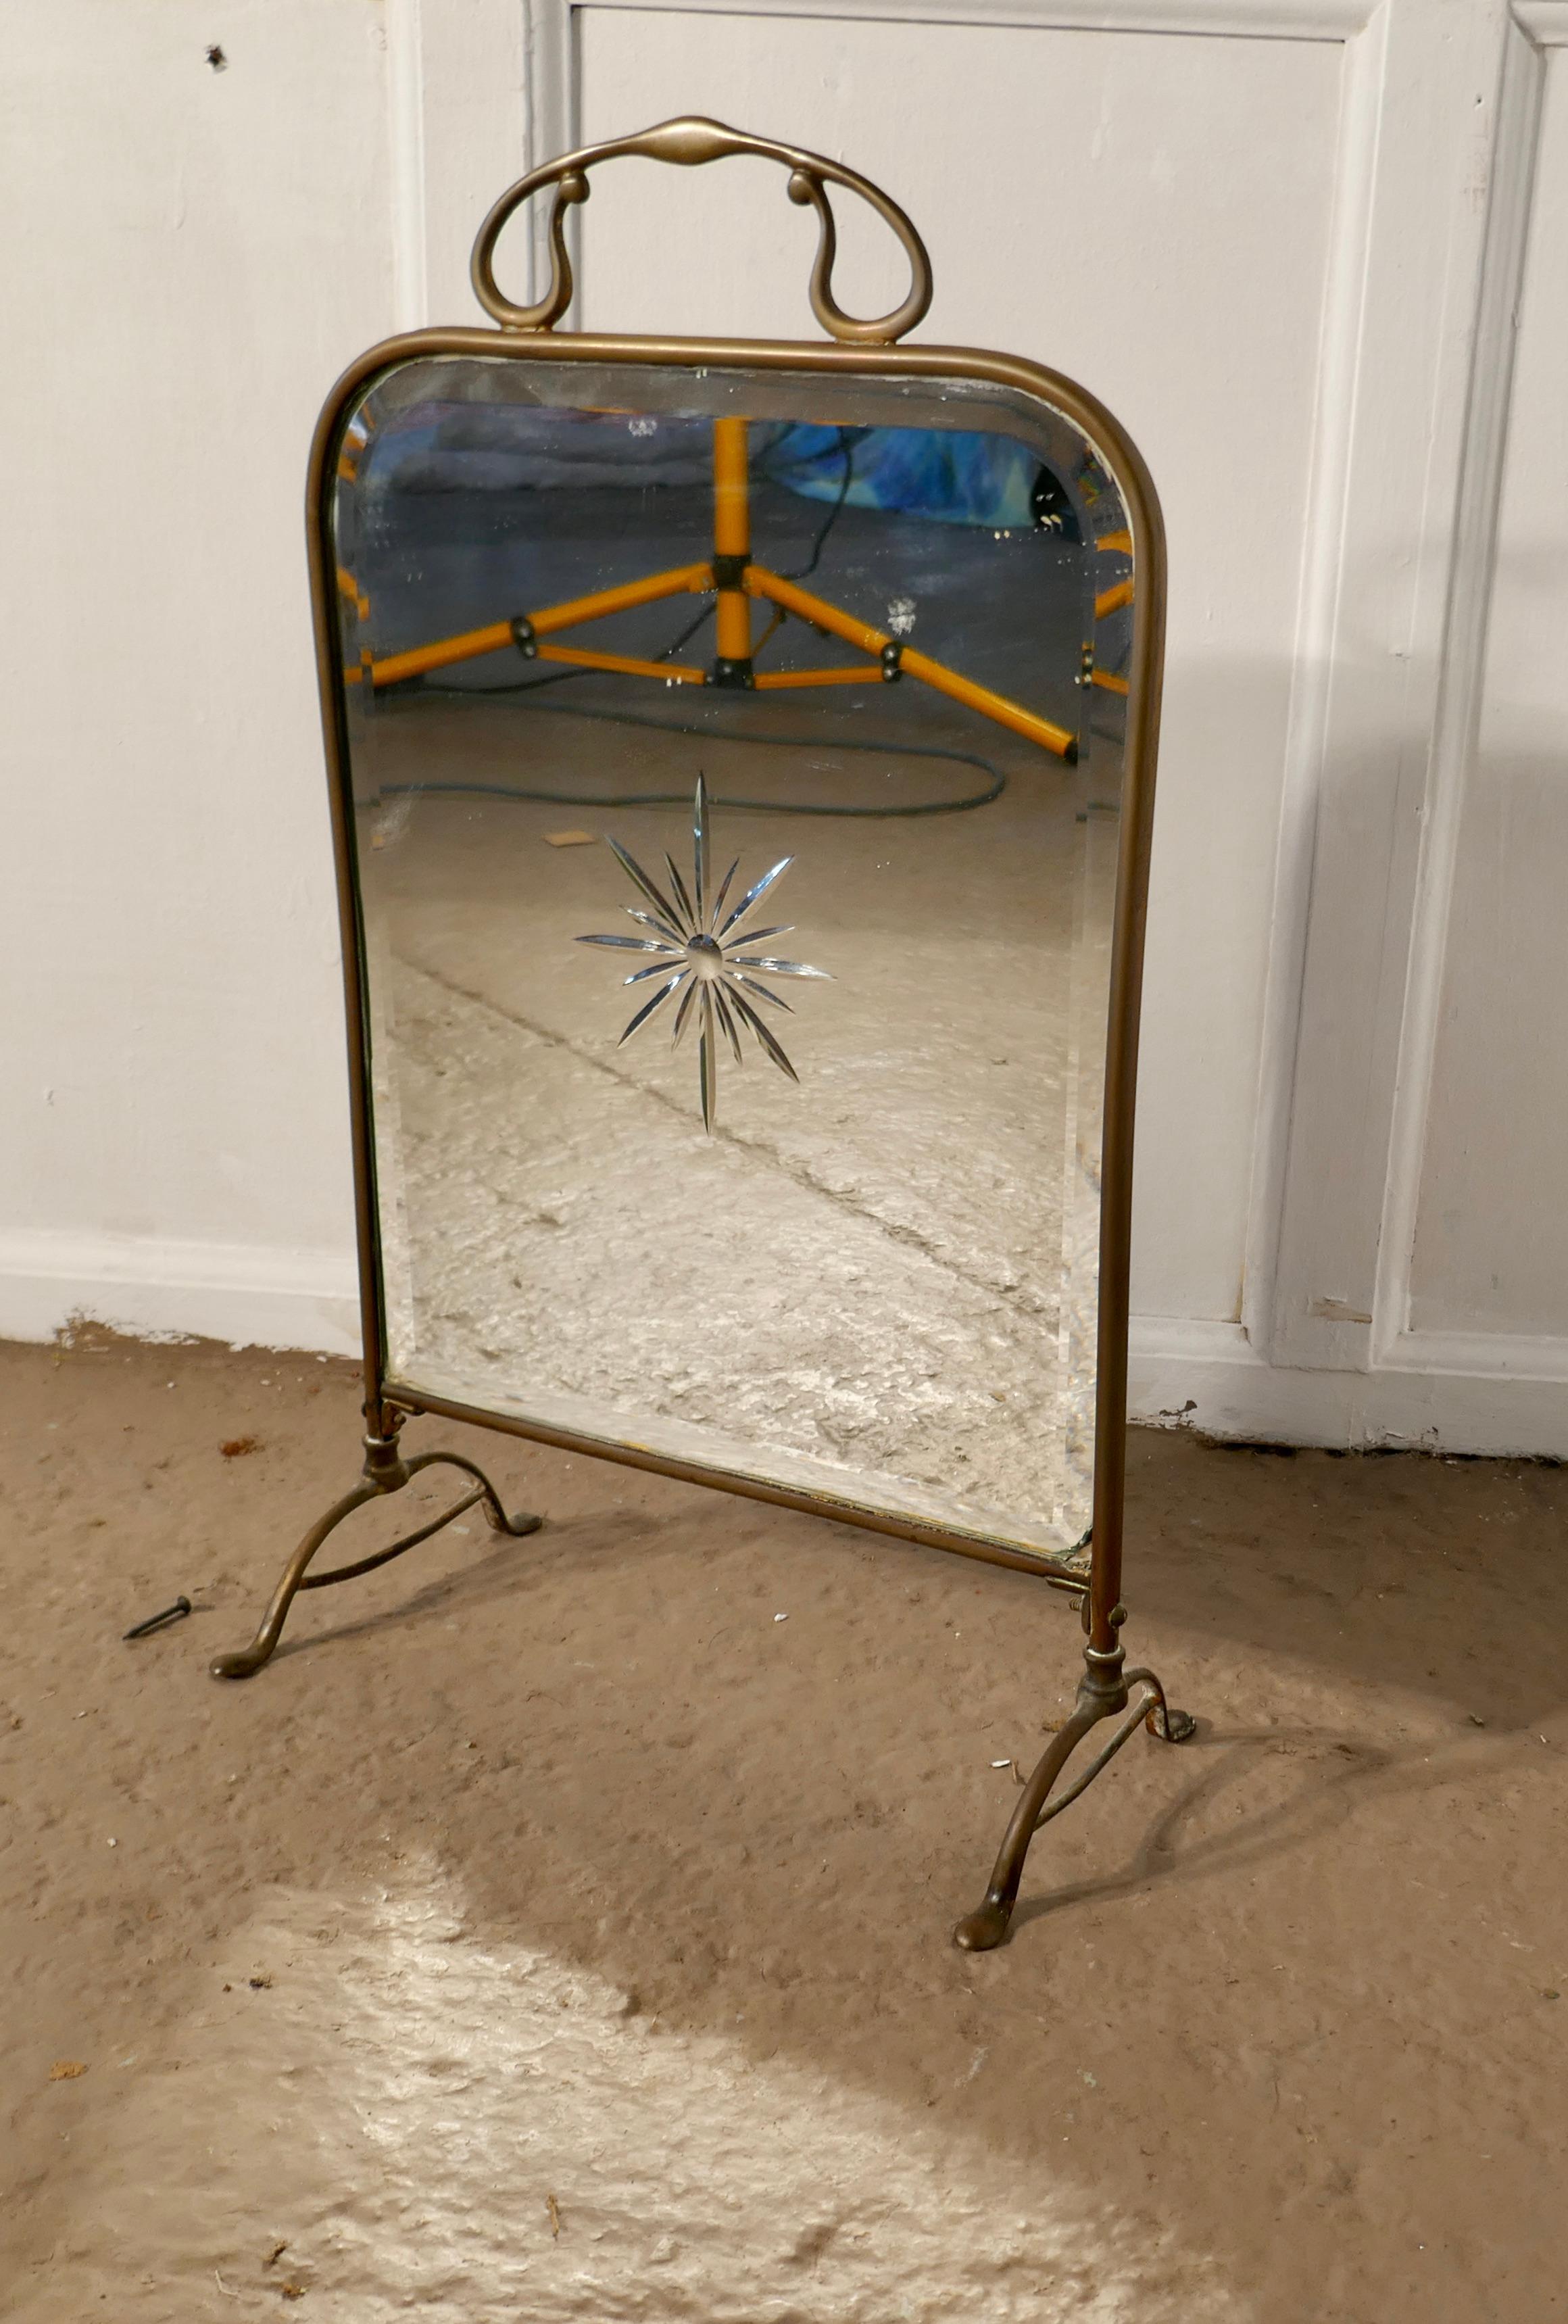 A Victorian Art Nouveau brass and sunburst mirror fire screen

This is a most decorative fire screen it has a brass frame and stand, the bevelled mirror has an etched starburst in the centre, and a typical Art Nouveau style handle on top
The